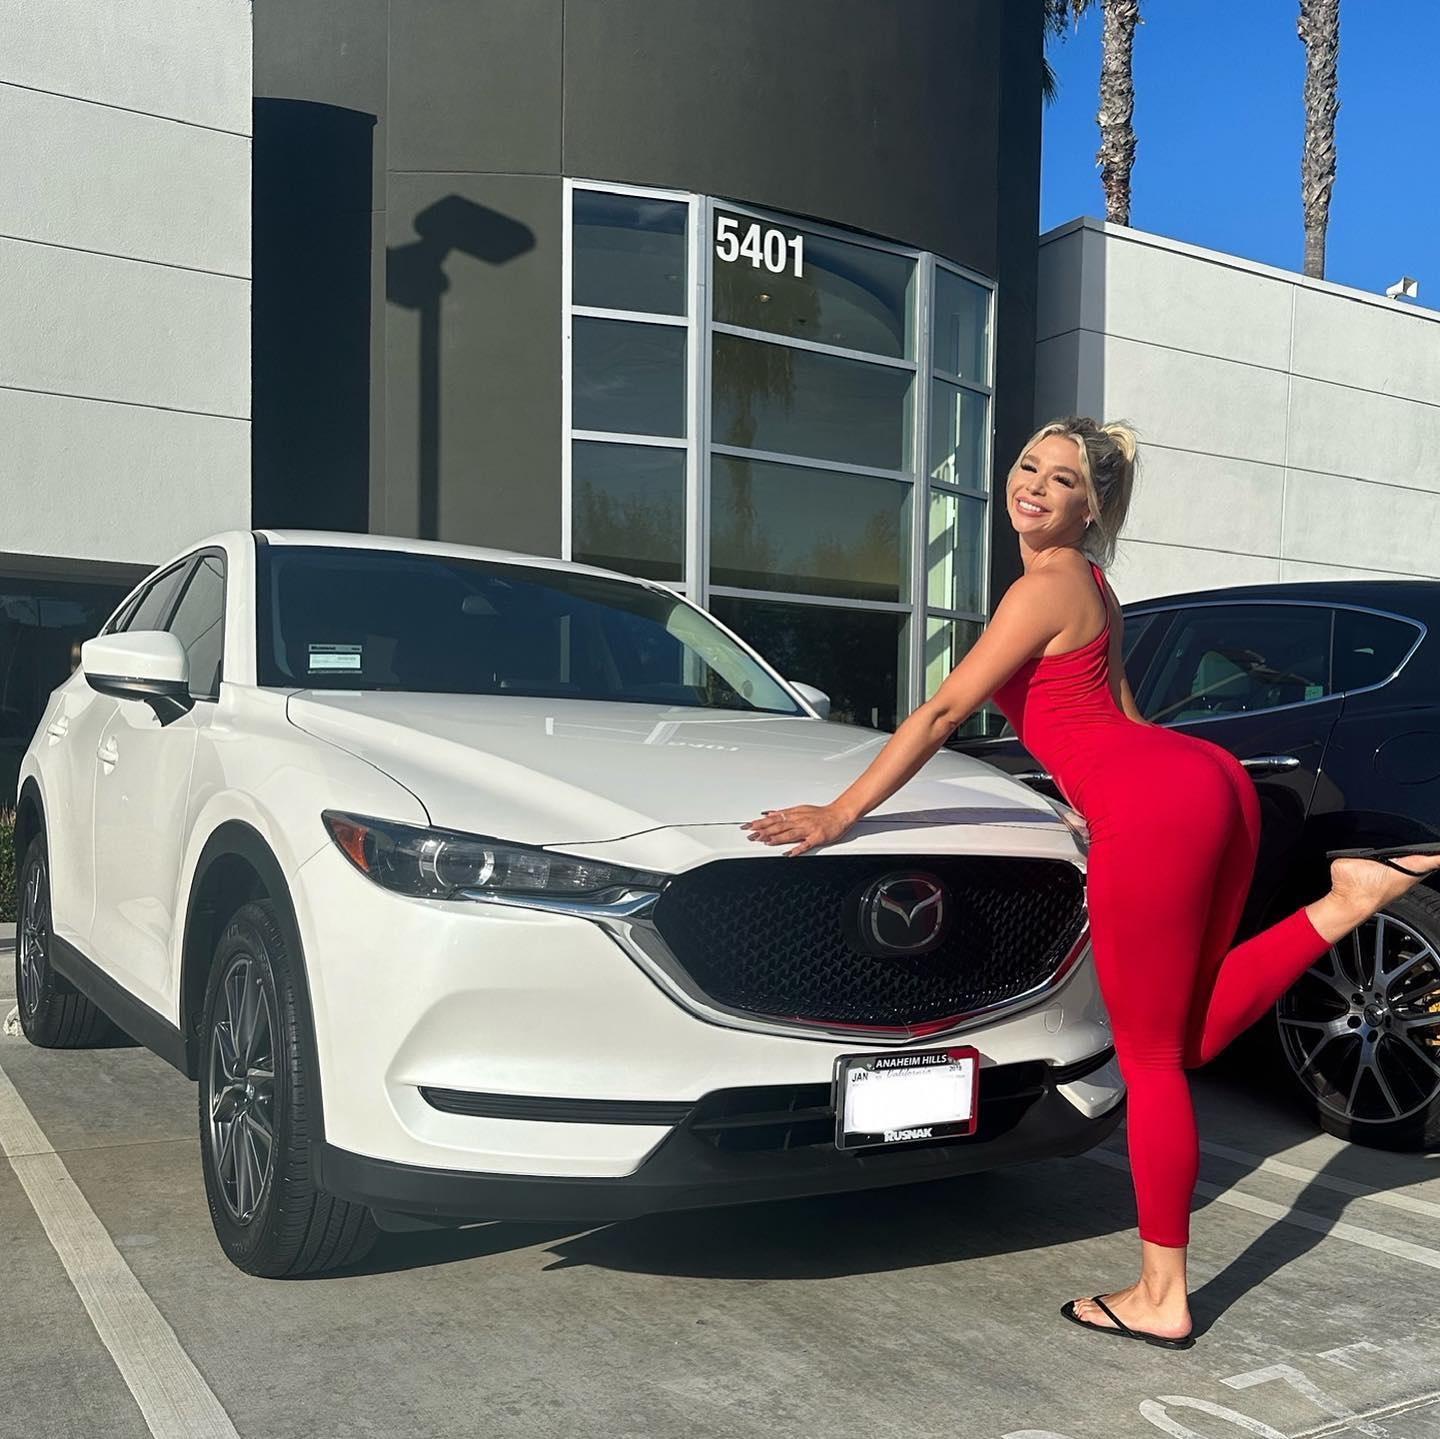 Lindsey Gordon In Curve-Hugging Bodysuit Poses With New Car 2